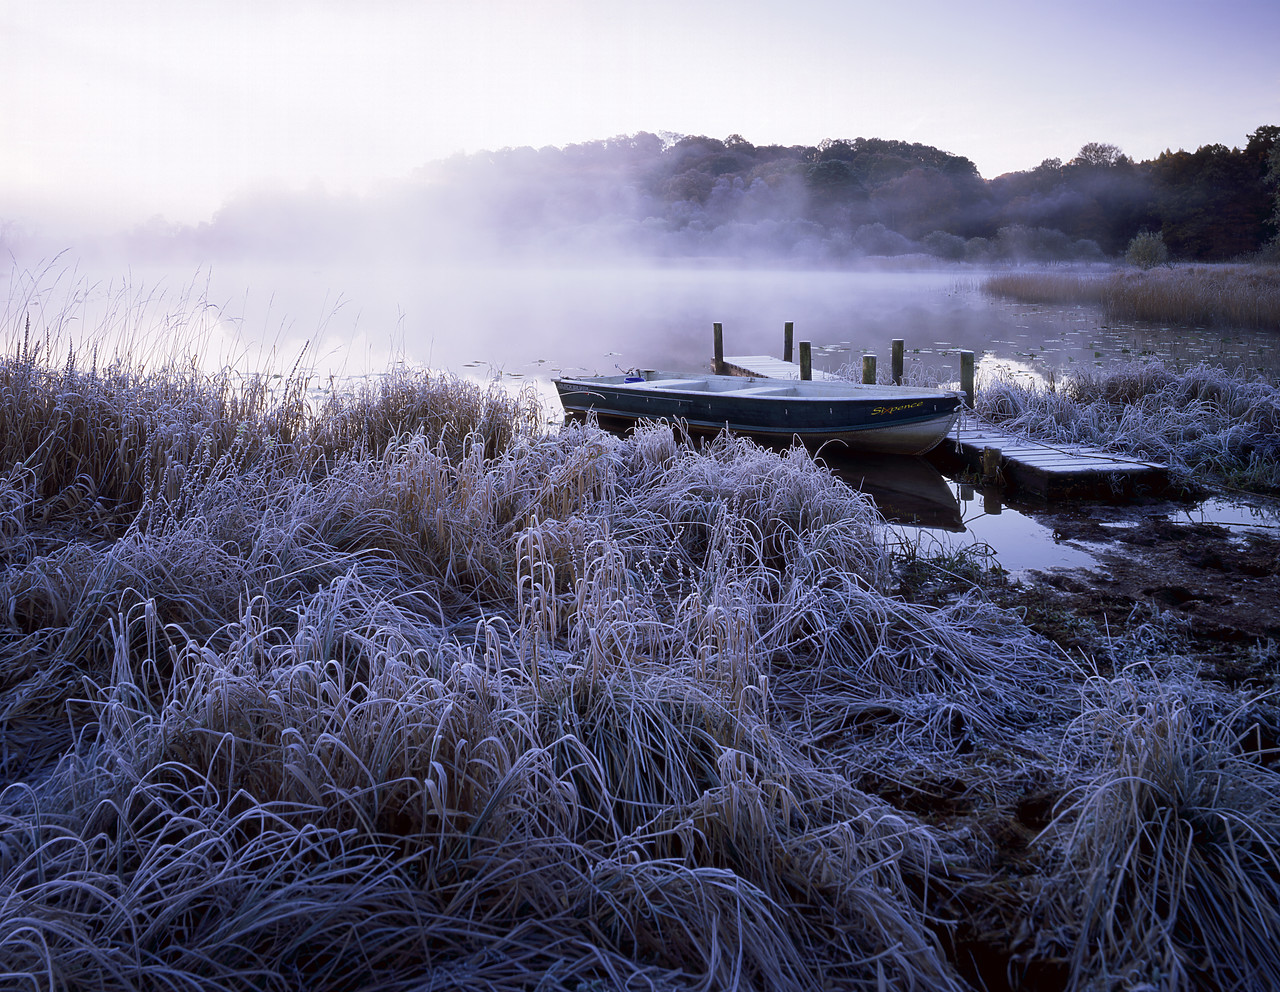 #060543-2 - Boat & Jetty in Frost, Lake District National Park, Cumbria, England